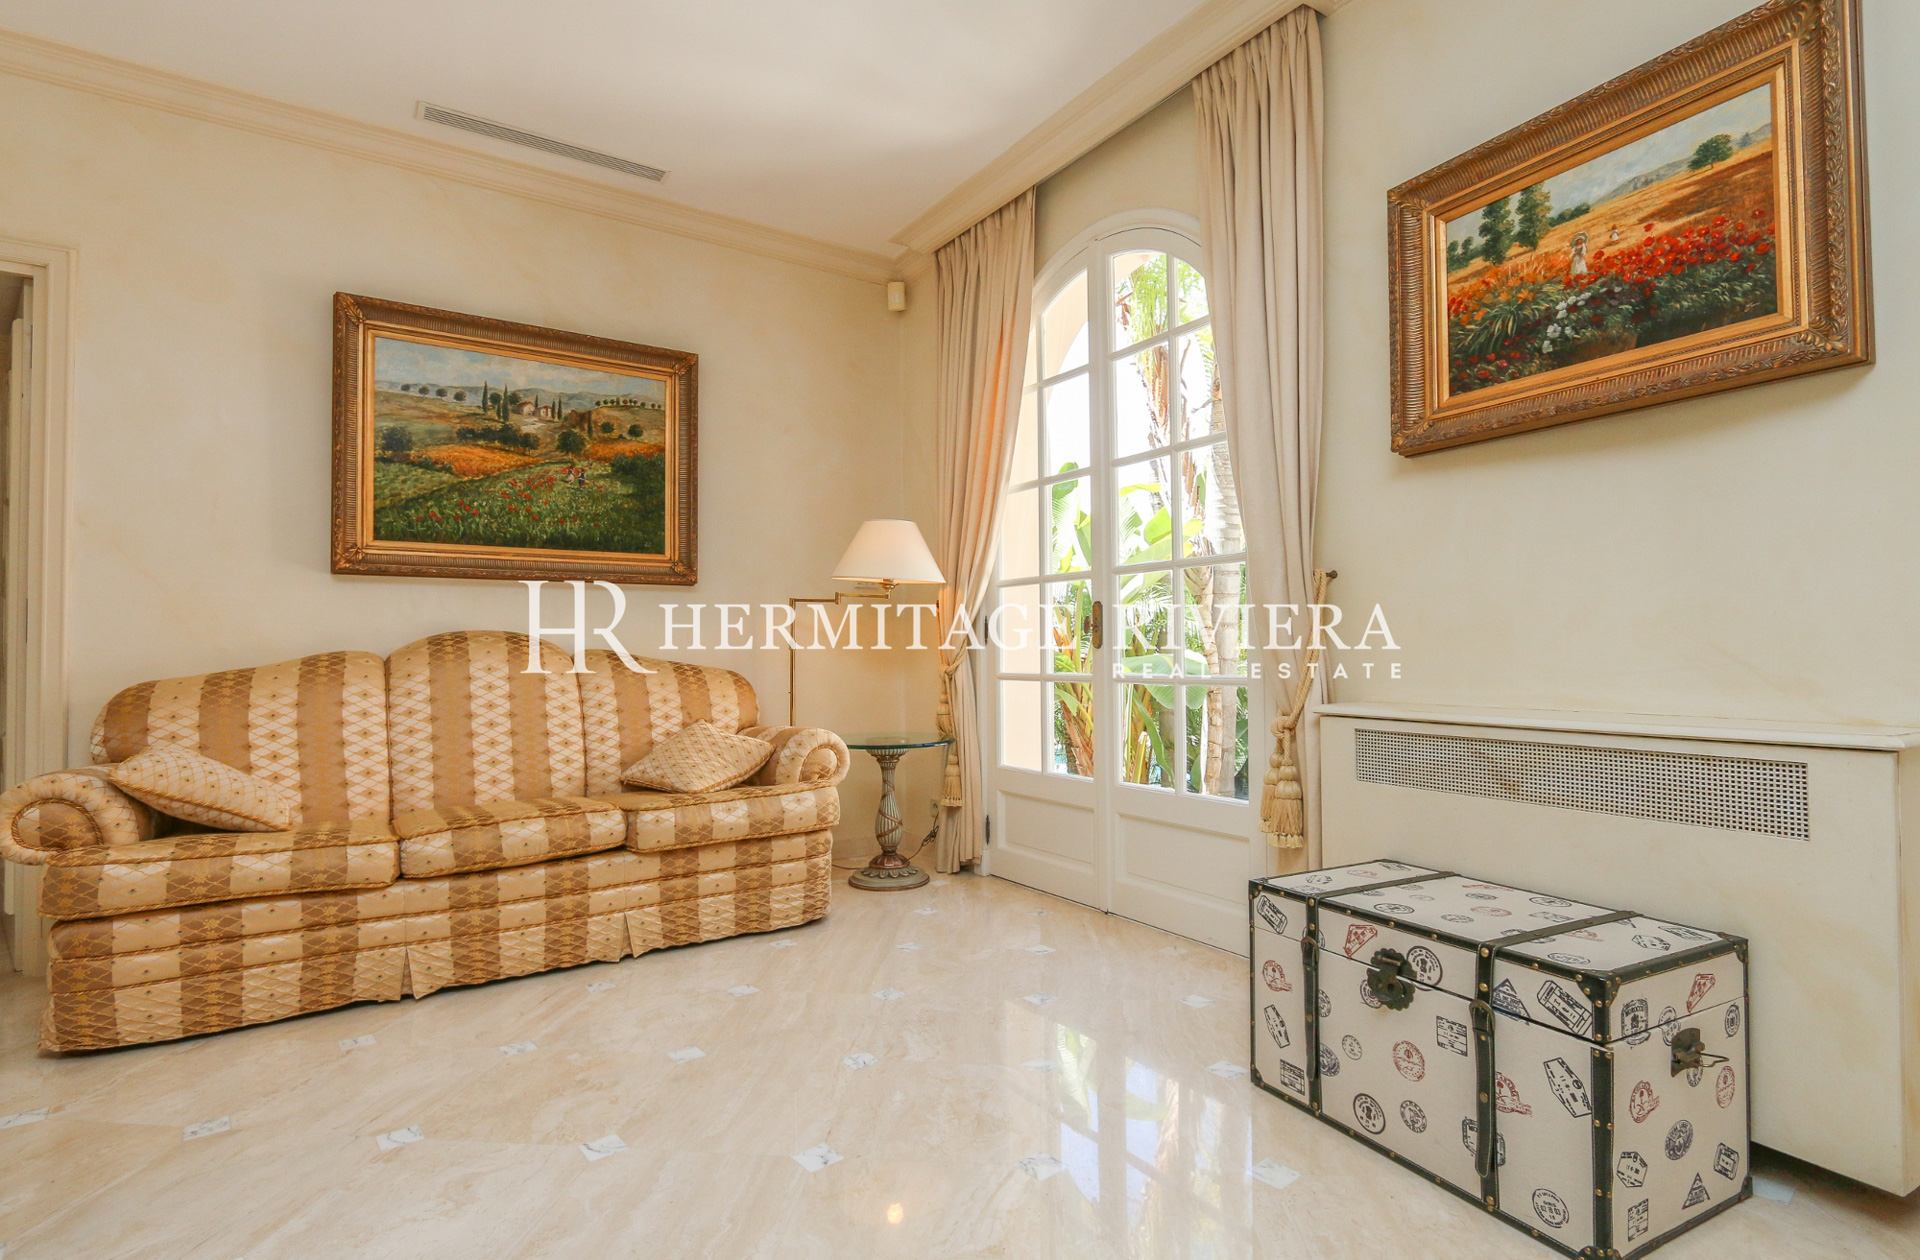 Property close Monaco with panoramic view (image 18)